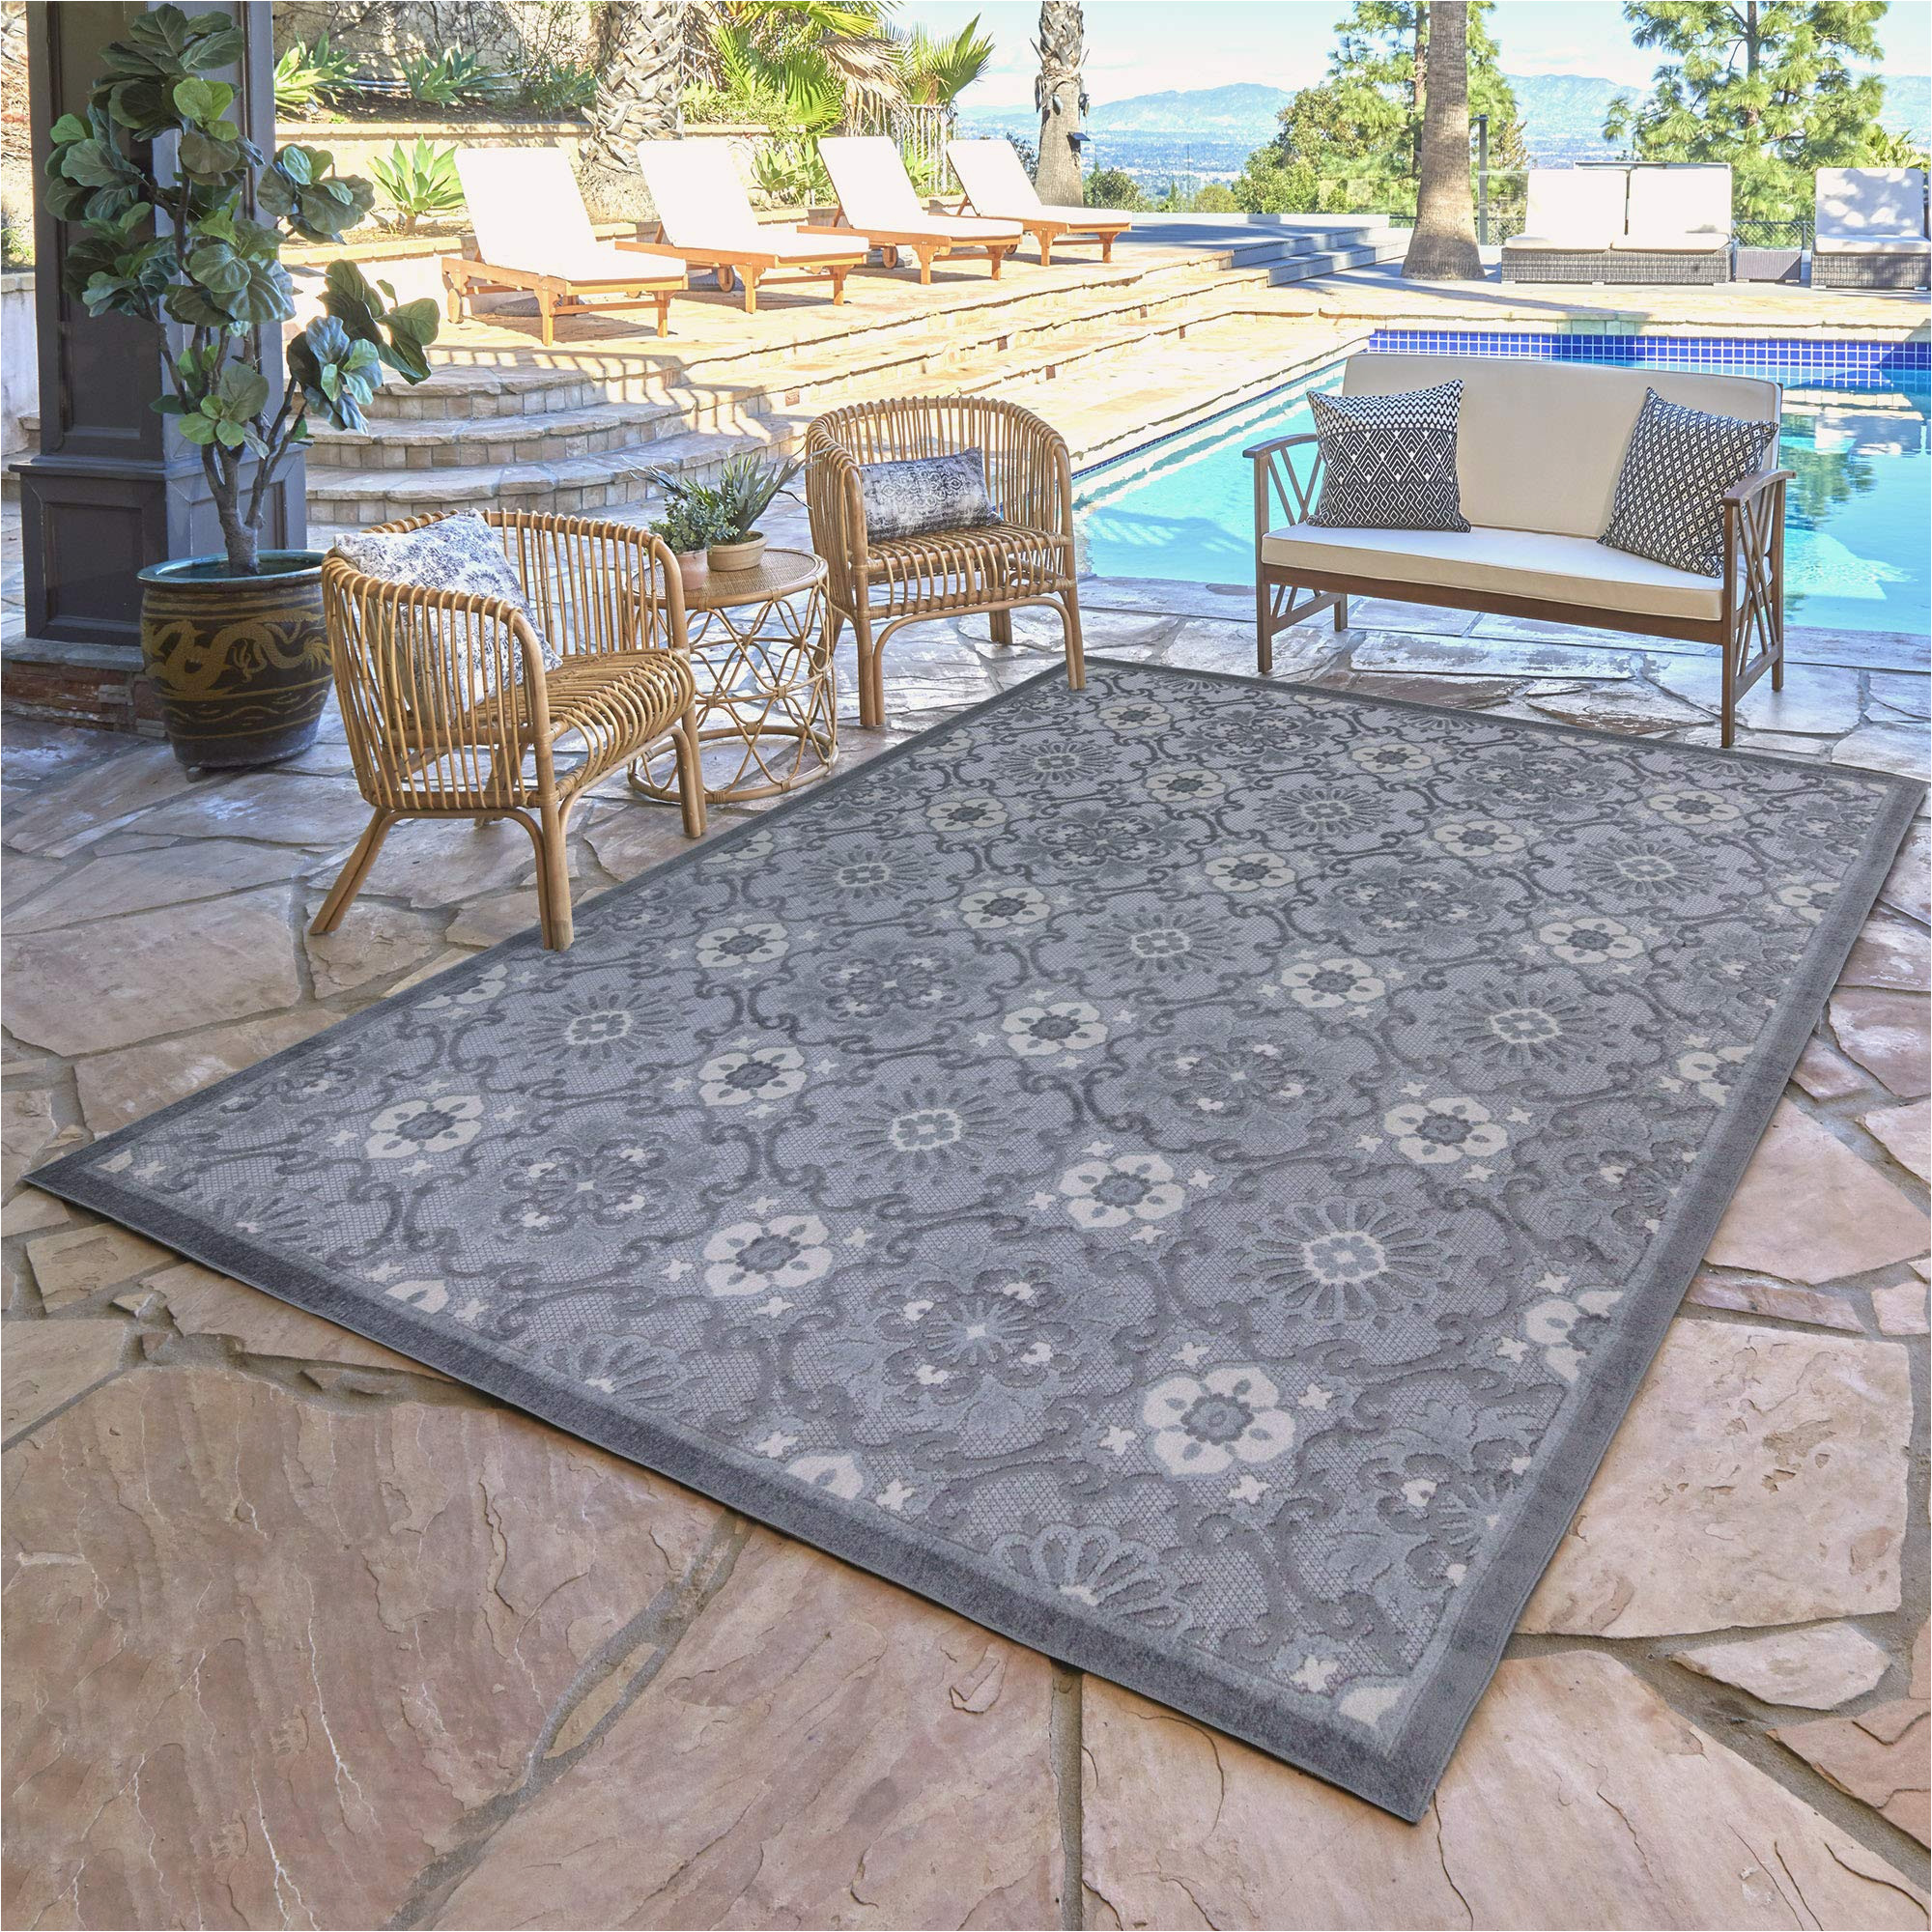 Elements Indoor Outdoor Citra Medallion area Rug Gertmenian 22431 Indoor Outdoor Rug Textured Outside Patio Textural Carpet, 9×13 Extra Large, Abstract Floral Medallion Gray